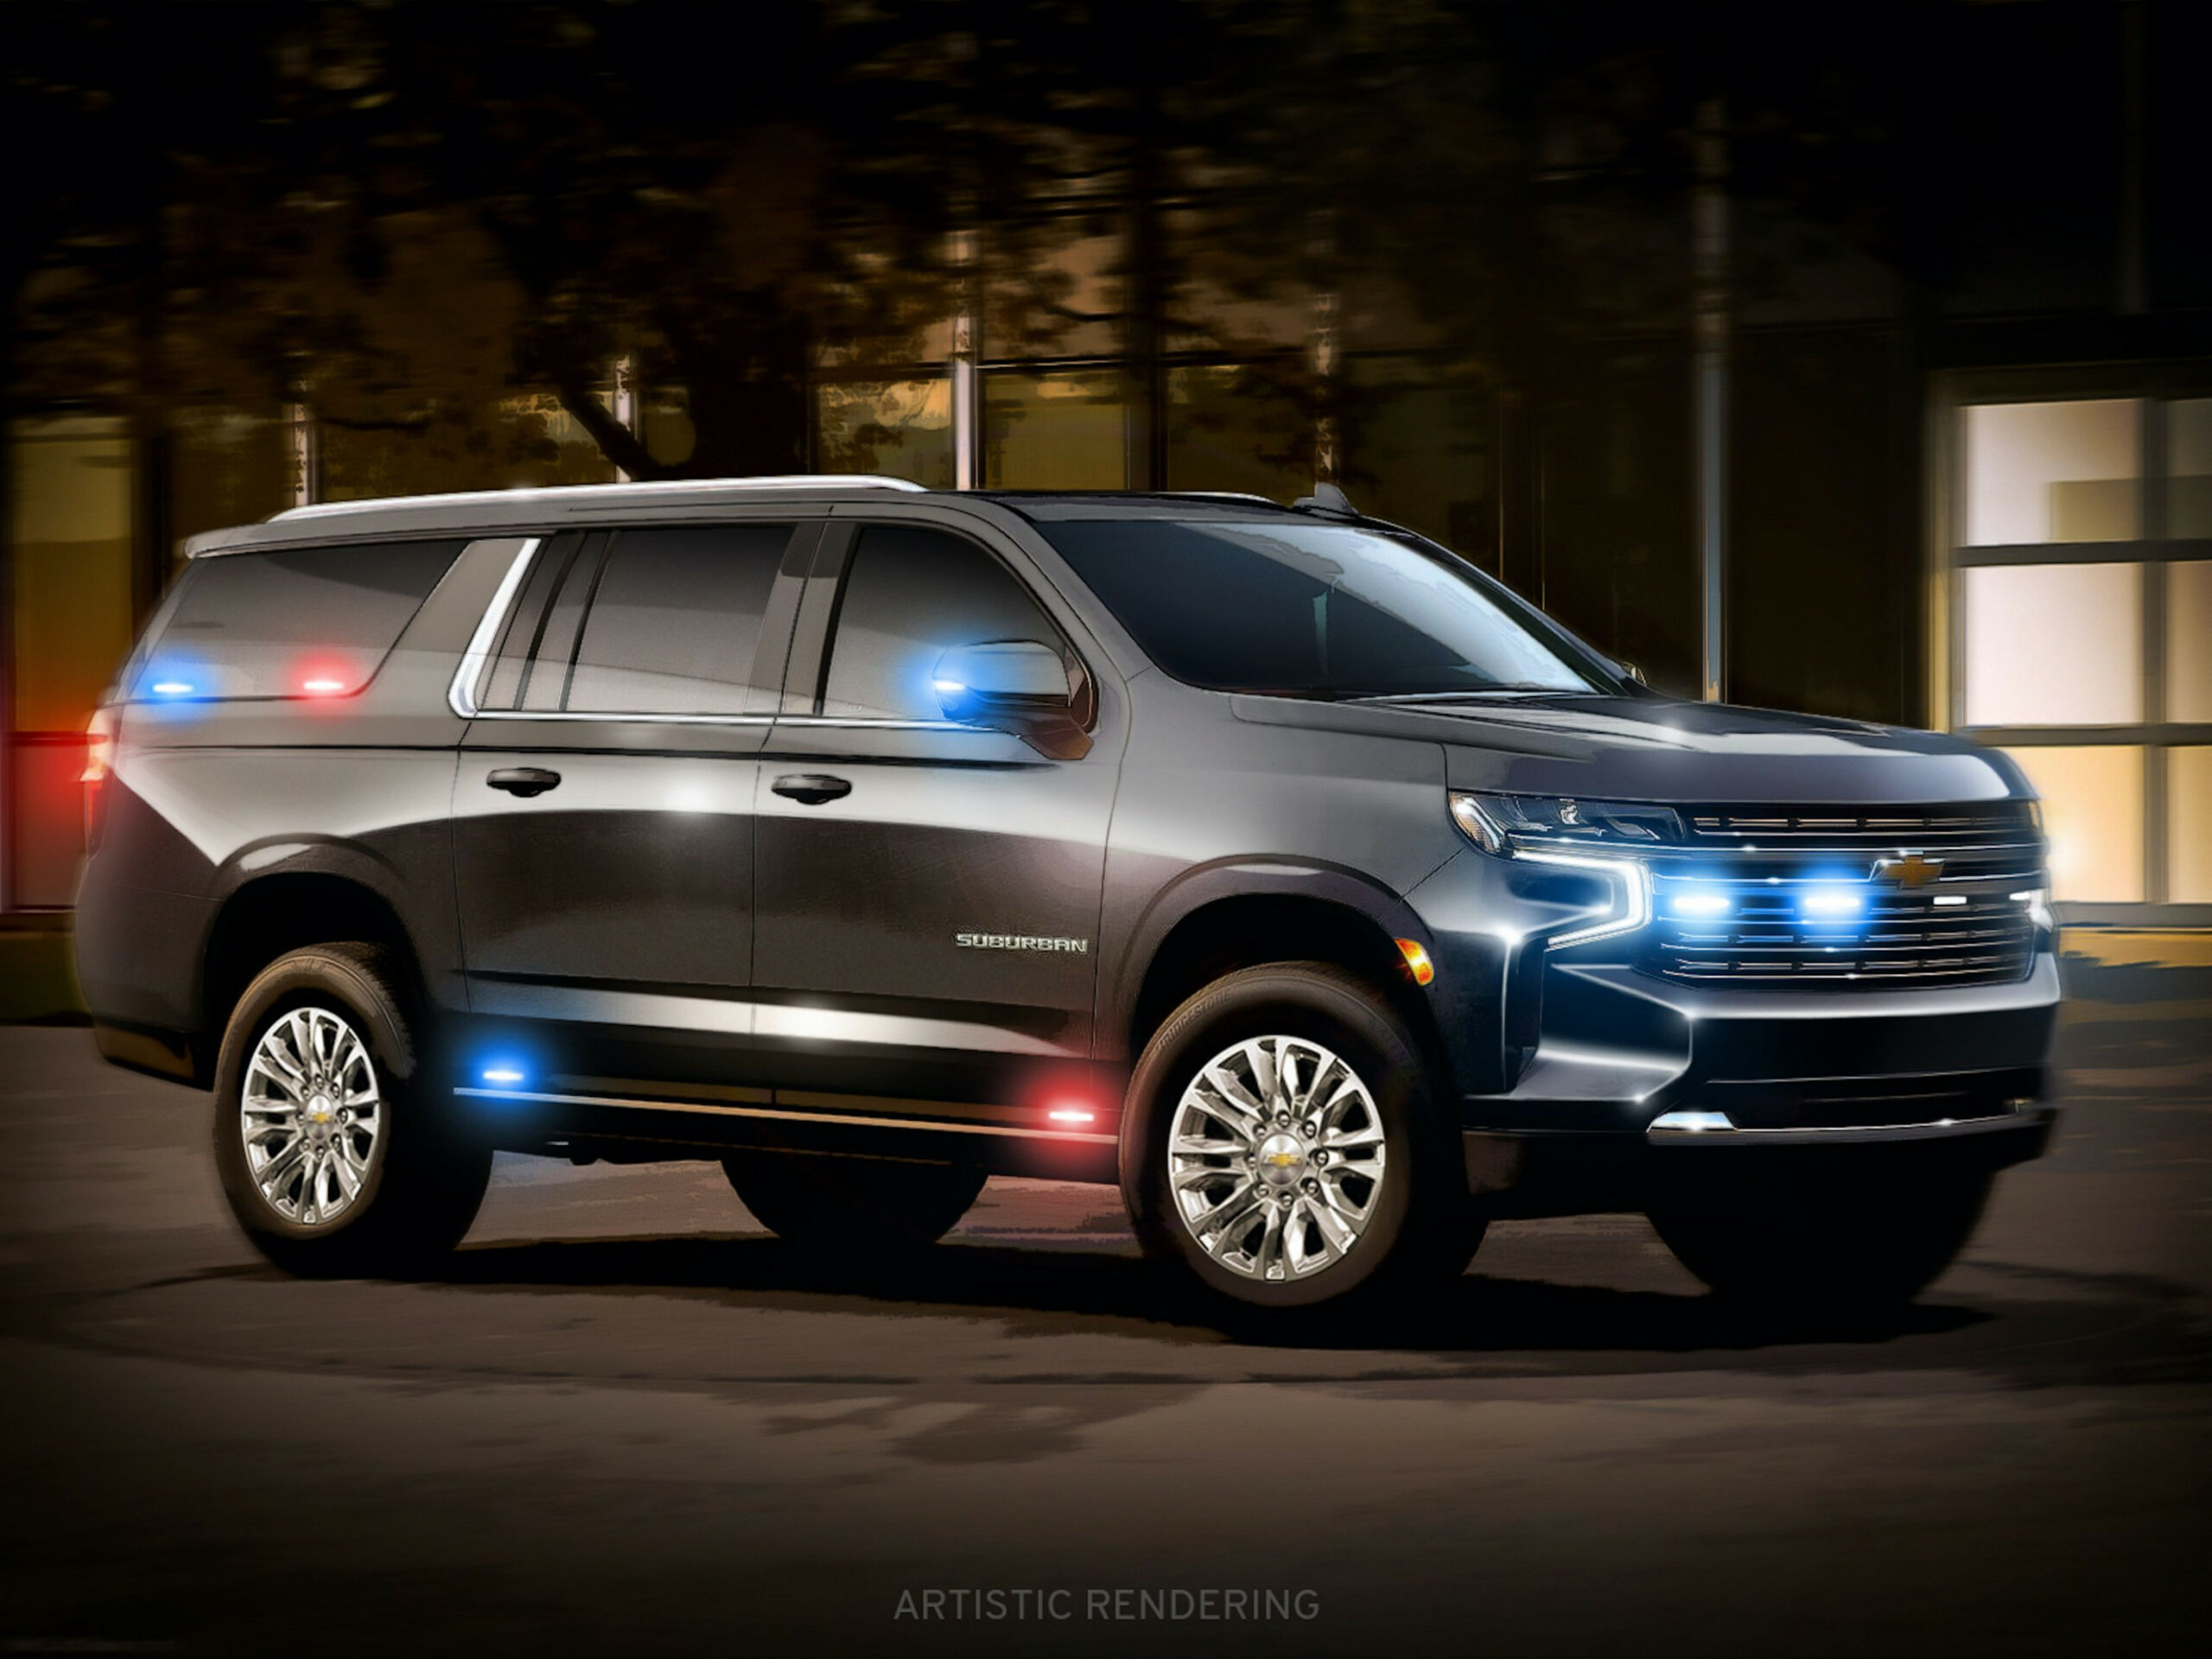 Price, Design and Review When Will The 2023 Chevrolet Suburban Be Released